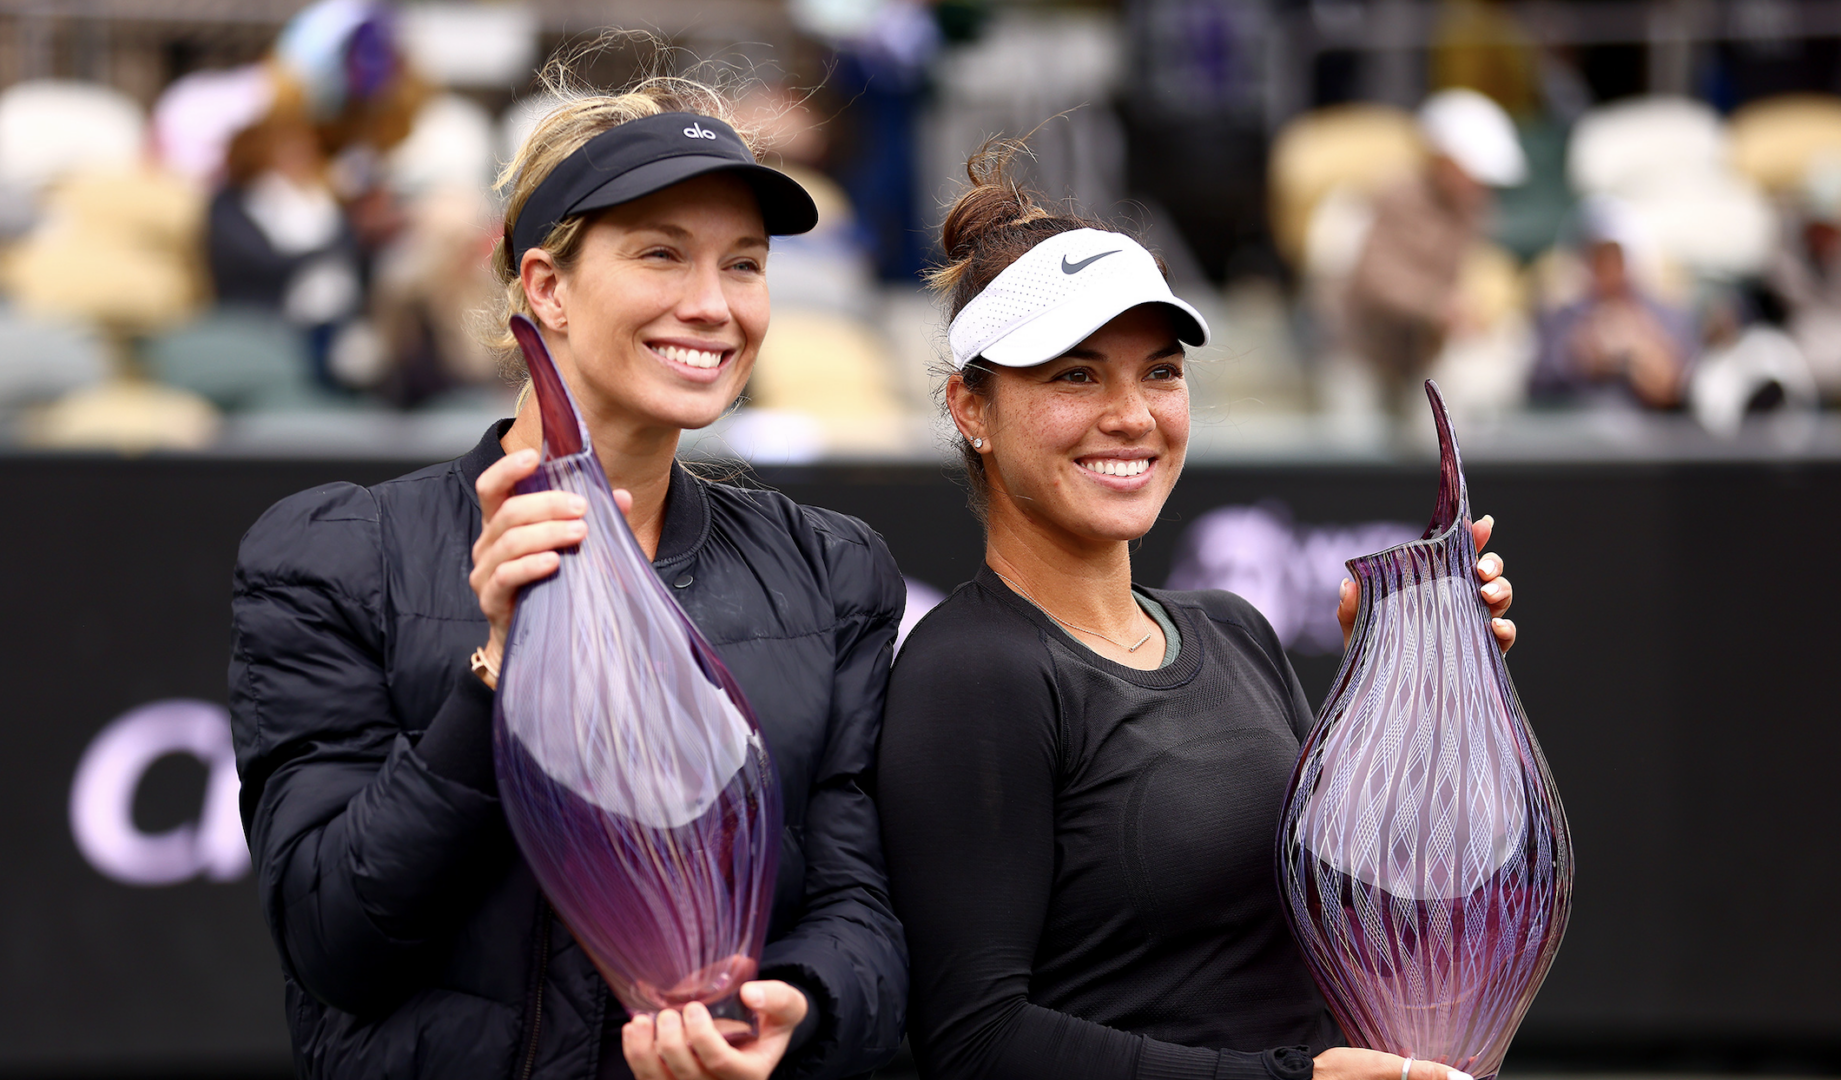 American duo Collins/Krawczyk claim Charleston Open doubles title